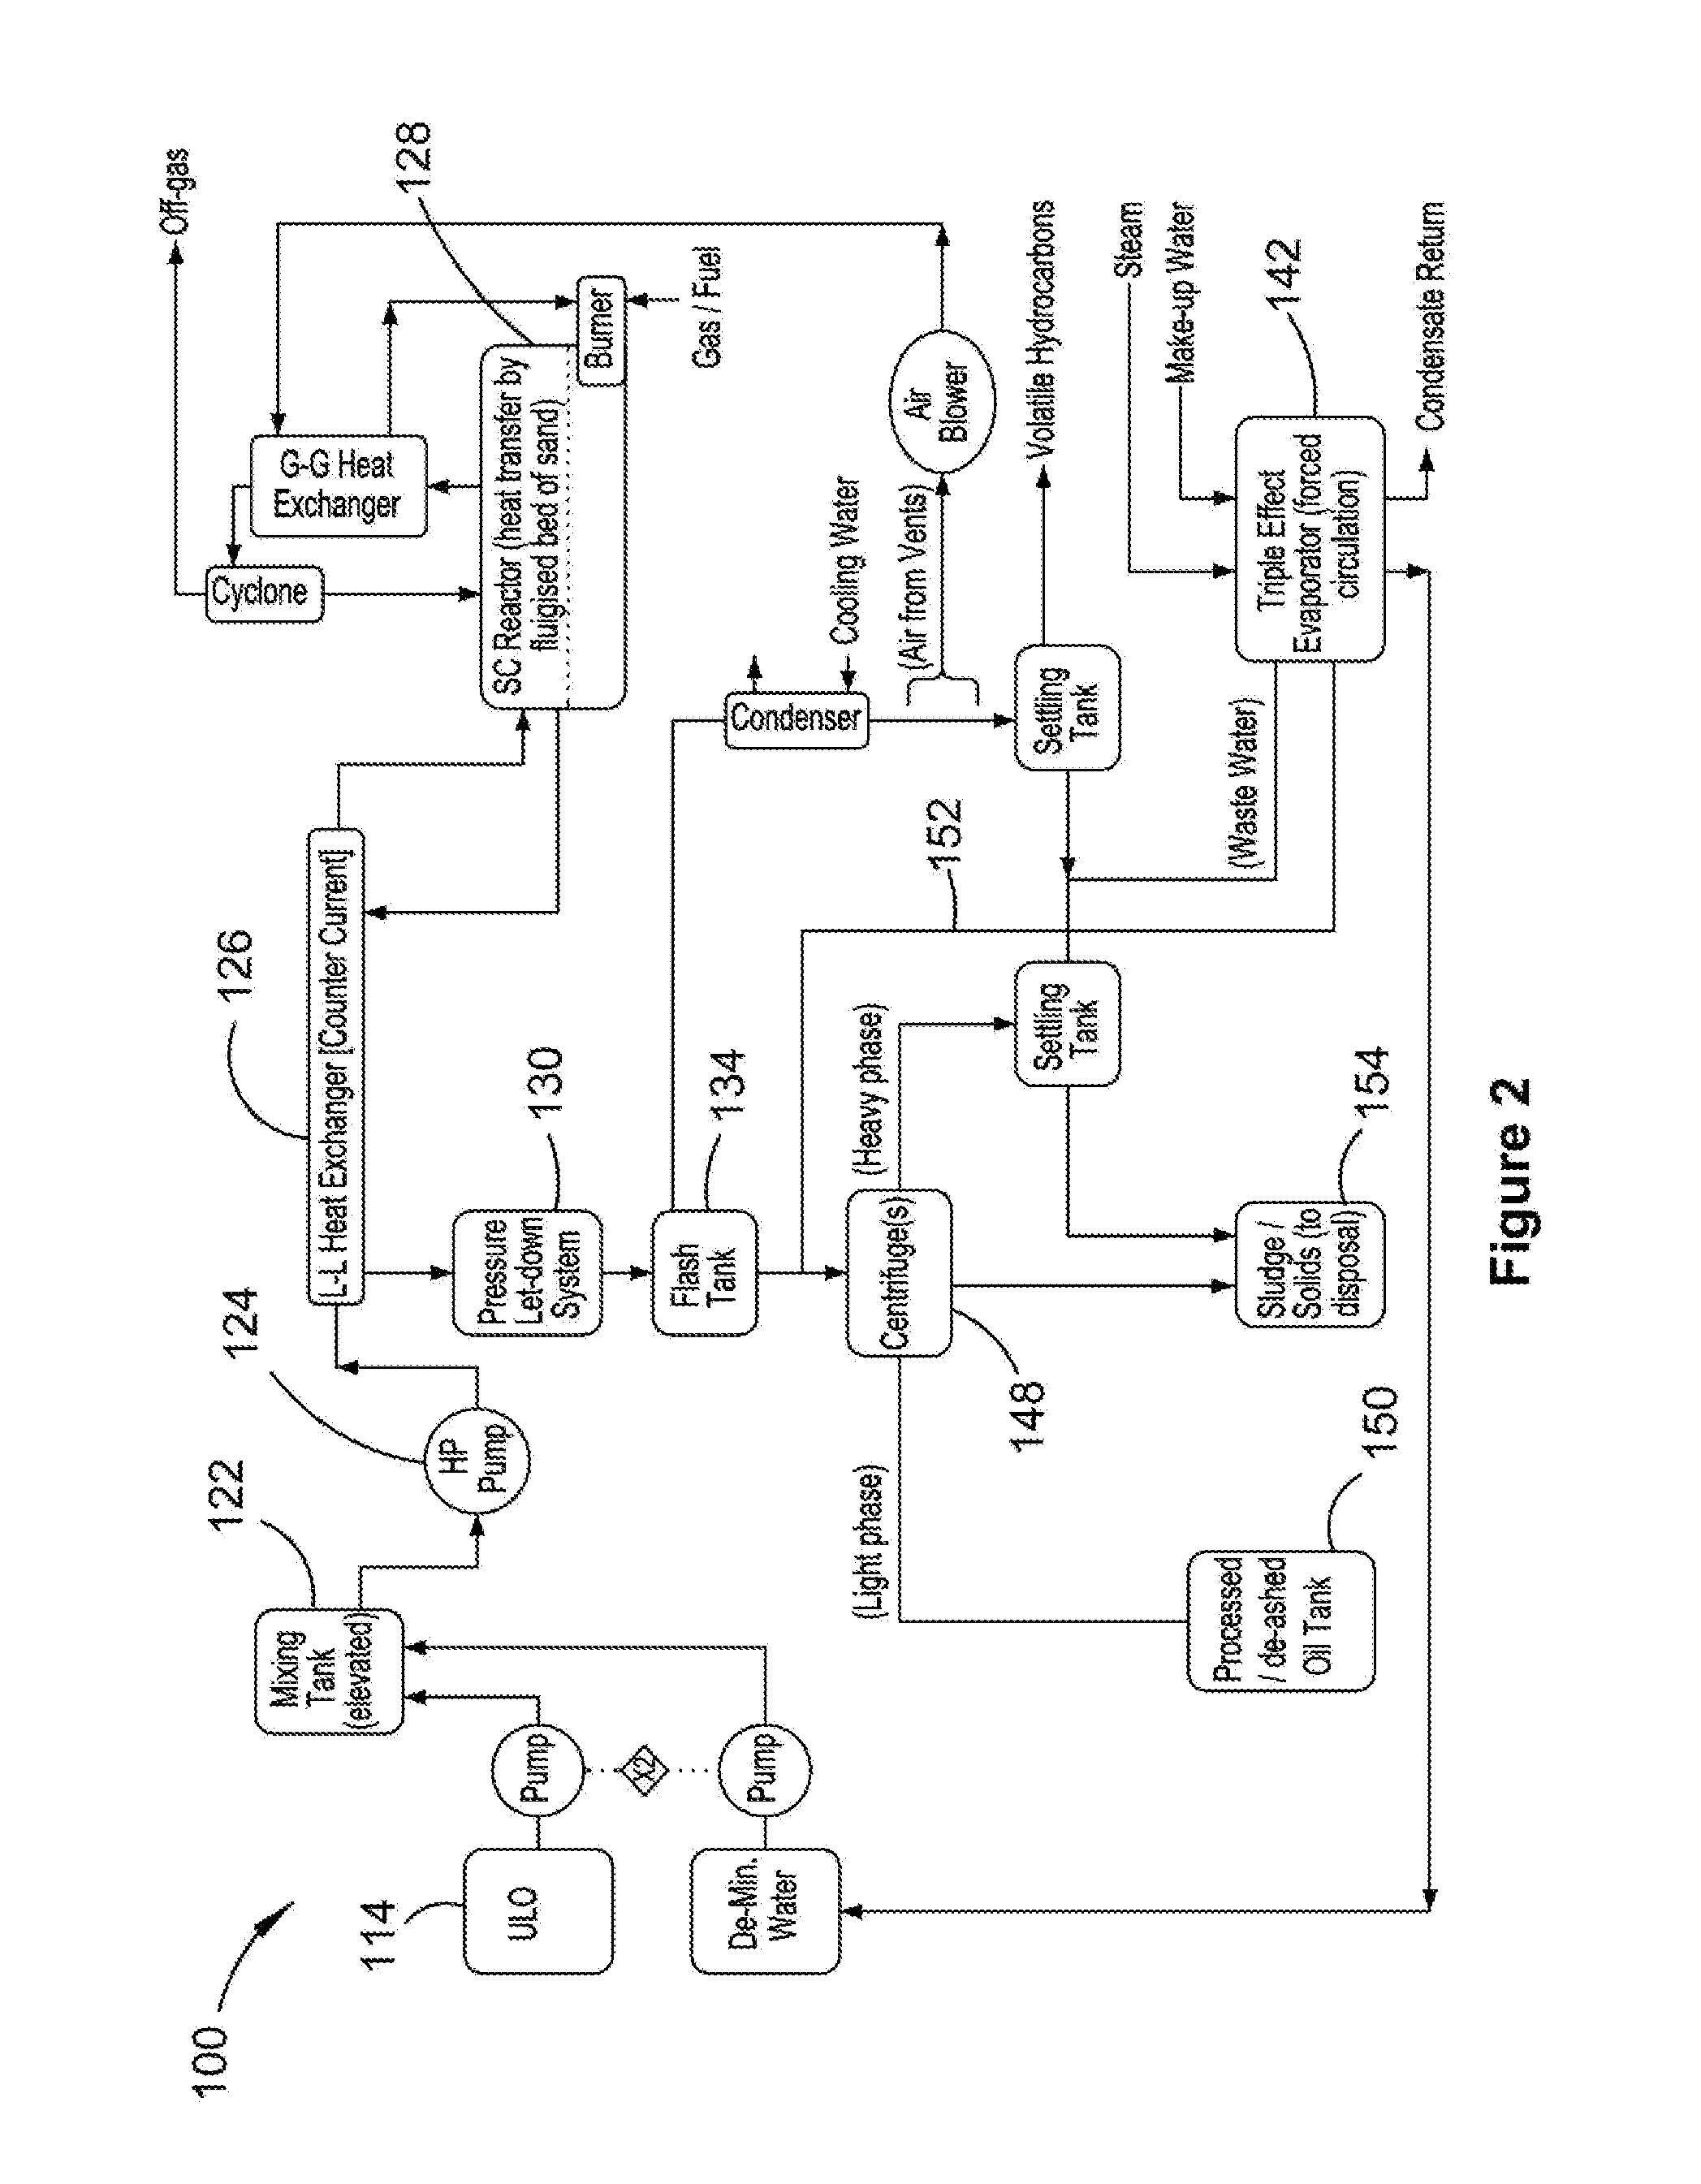 Method and apparatus for upgrading a hydrocarbon